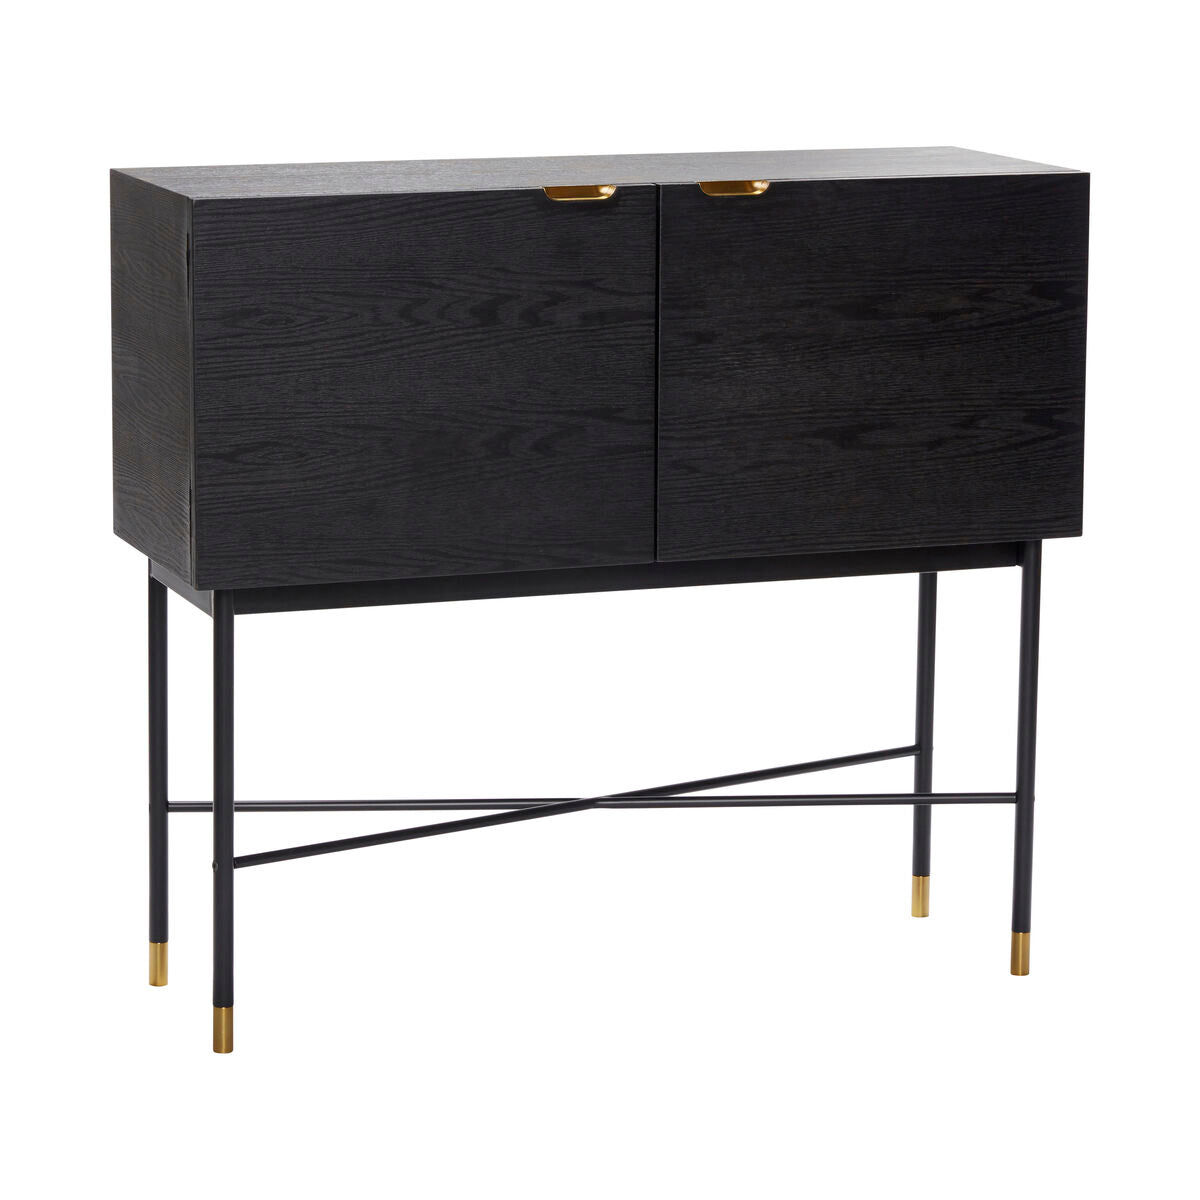 Standards are a chest of drawers that combines the features of a minimalist and functional furniture. Made of black ash wood. Brass handles break the color monotony and add elegance. It will be great as a piece of furniture for the necessary things in the dining room, living room or bedroom. He will like the spaces kept in Scandinavian and boho climate especially. It will introduce a designer supplement to them.